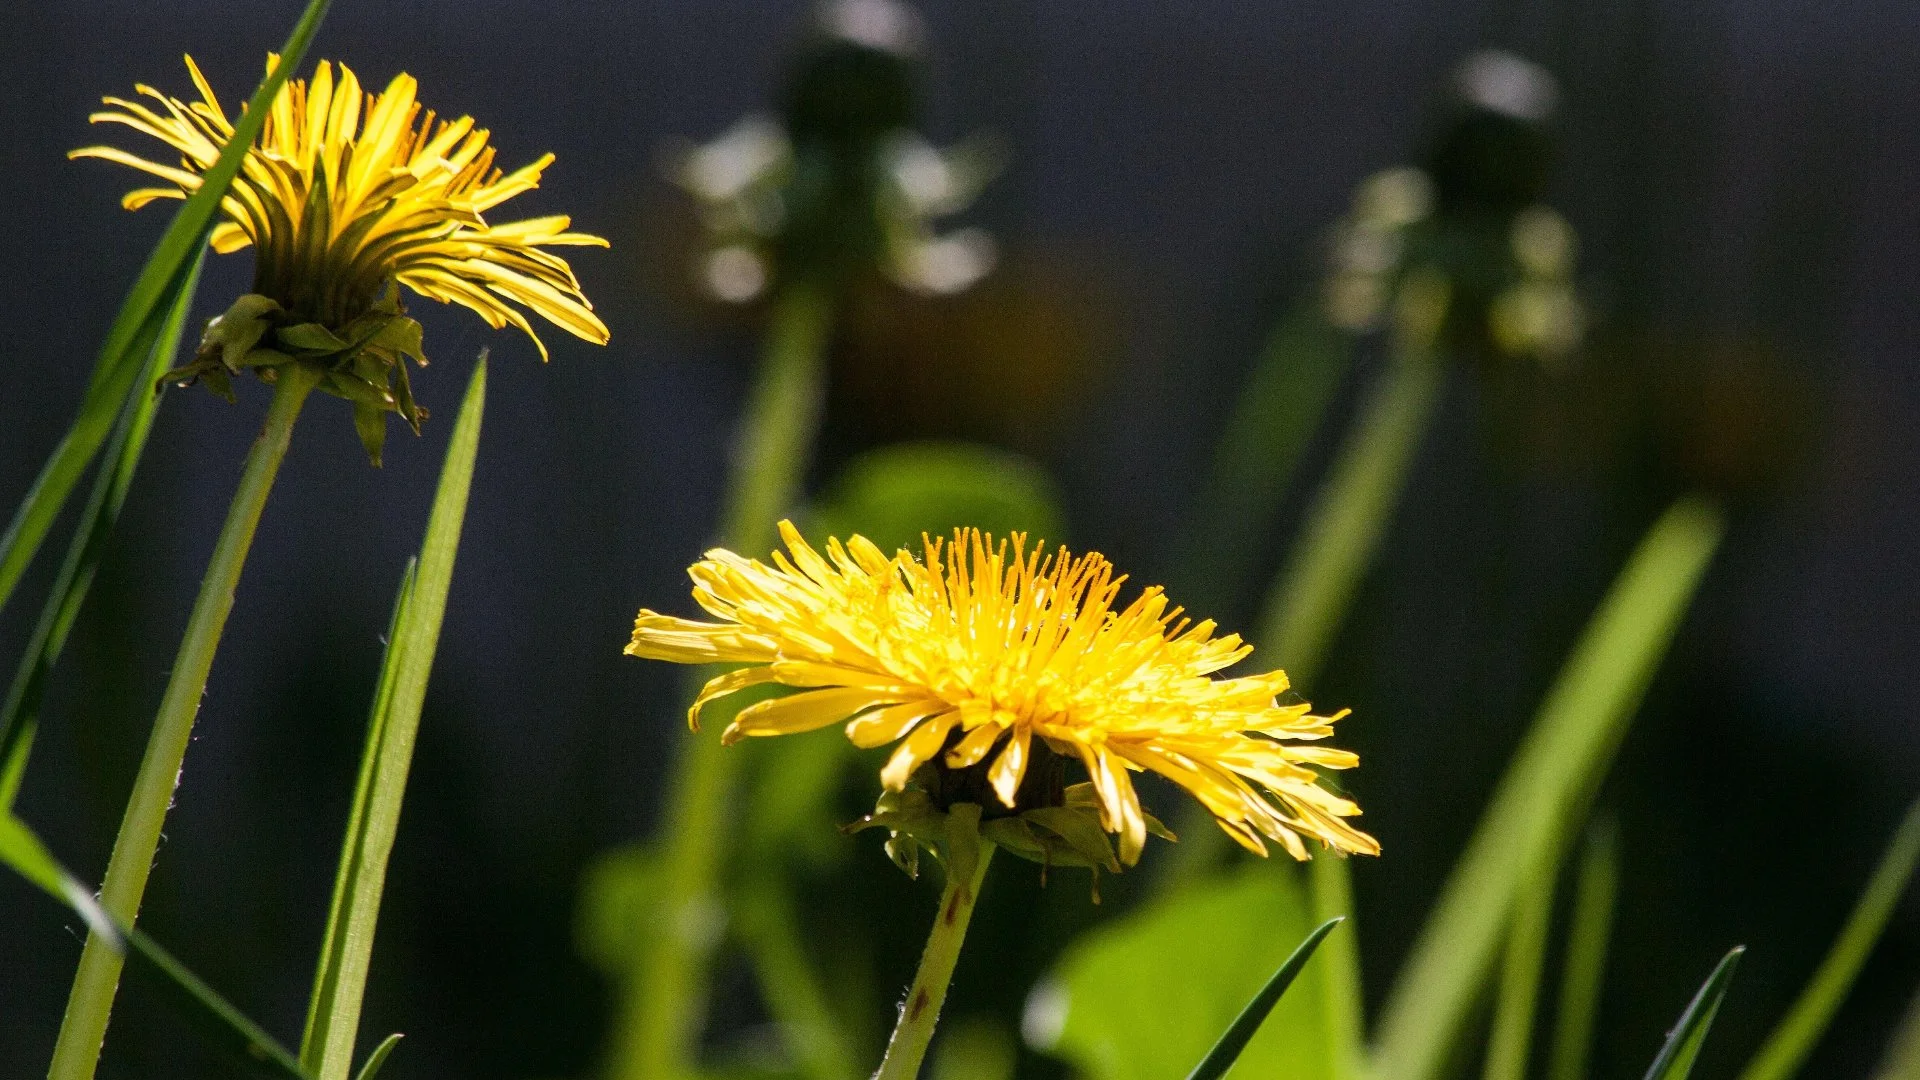 Dandelions Are Actually Weeds! Don’t Let Them Infiltrate Your Lawn